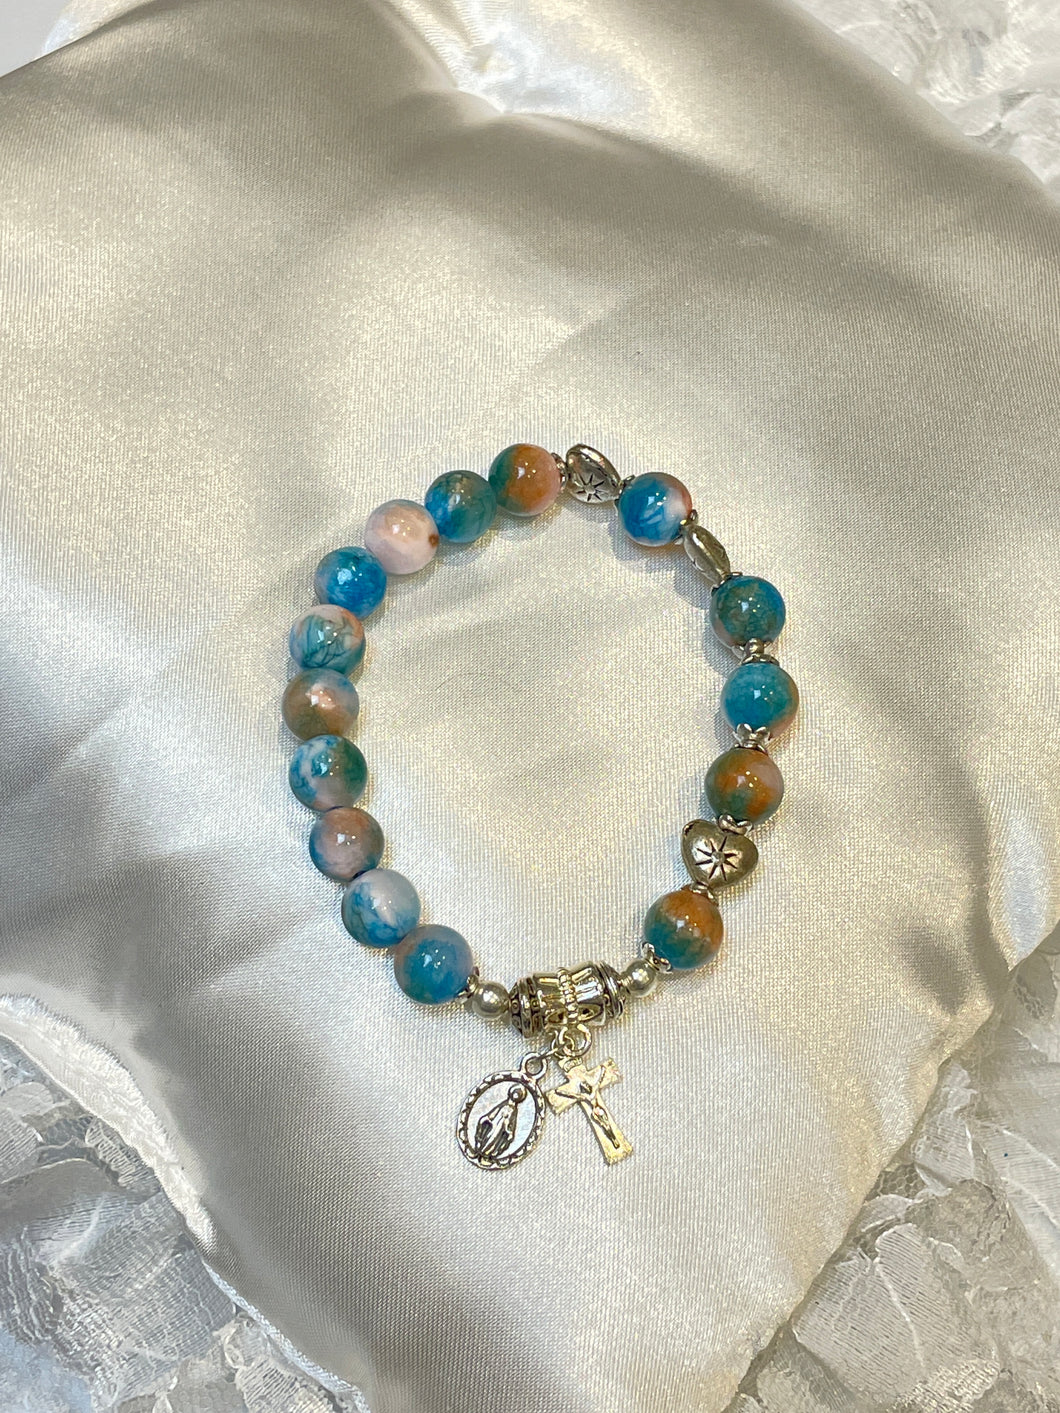 Mixed Colour Gemstone Rosary Bracelet with Miraculous Medal and Crucifix Charms